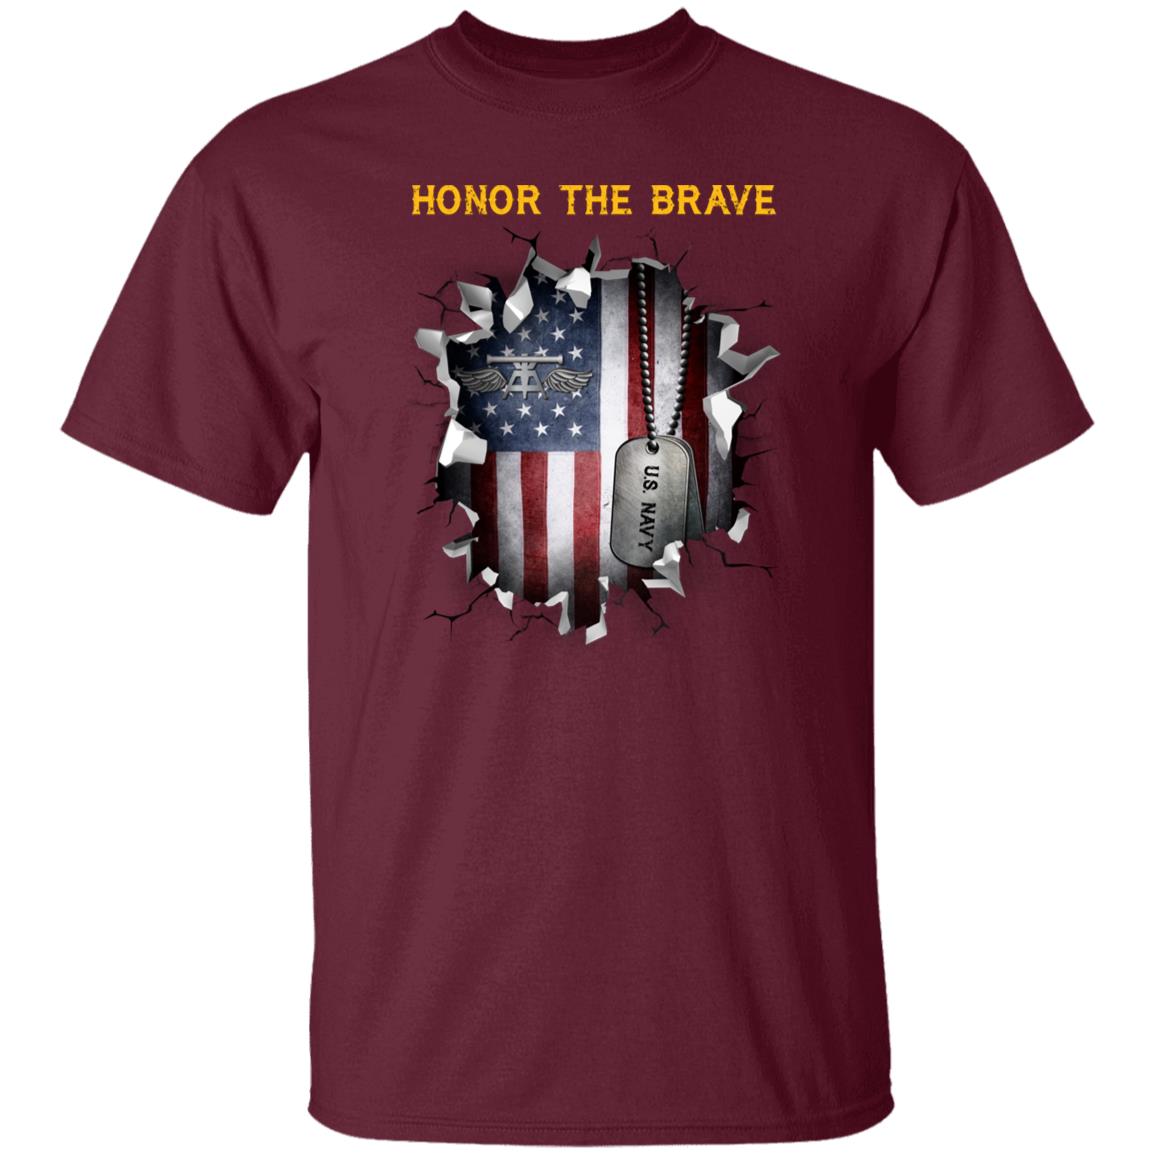 Navy Aviation Fire Control Tech Navy AQ - Honor The Brave Front Shirt